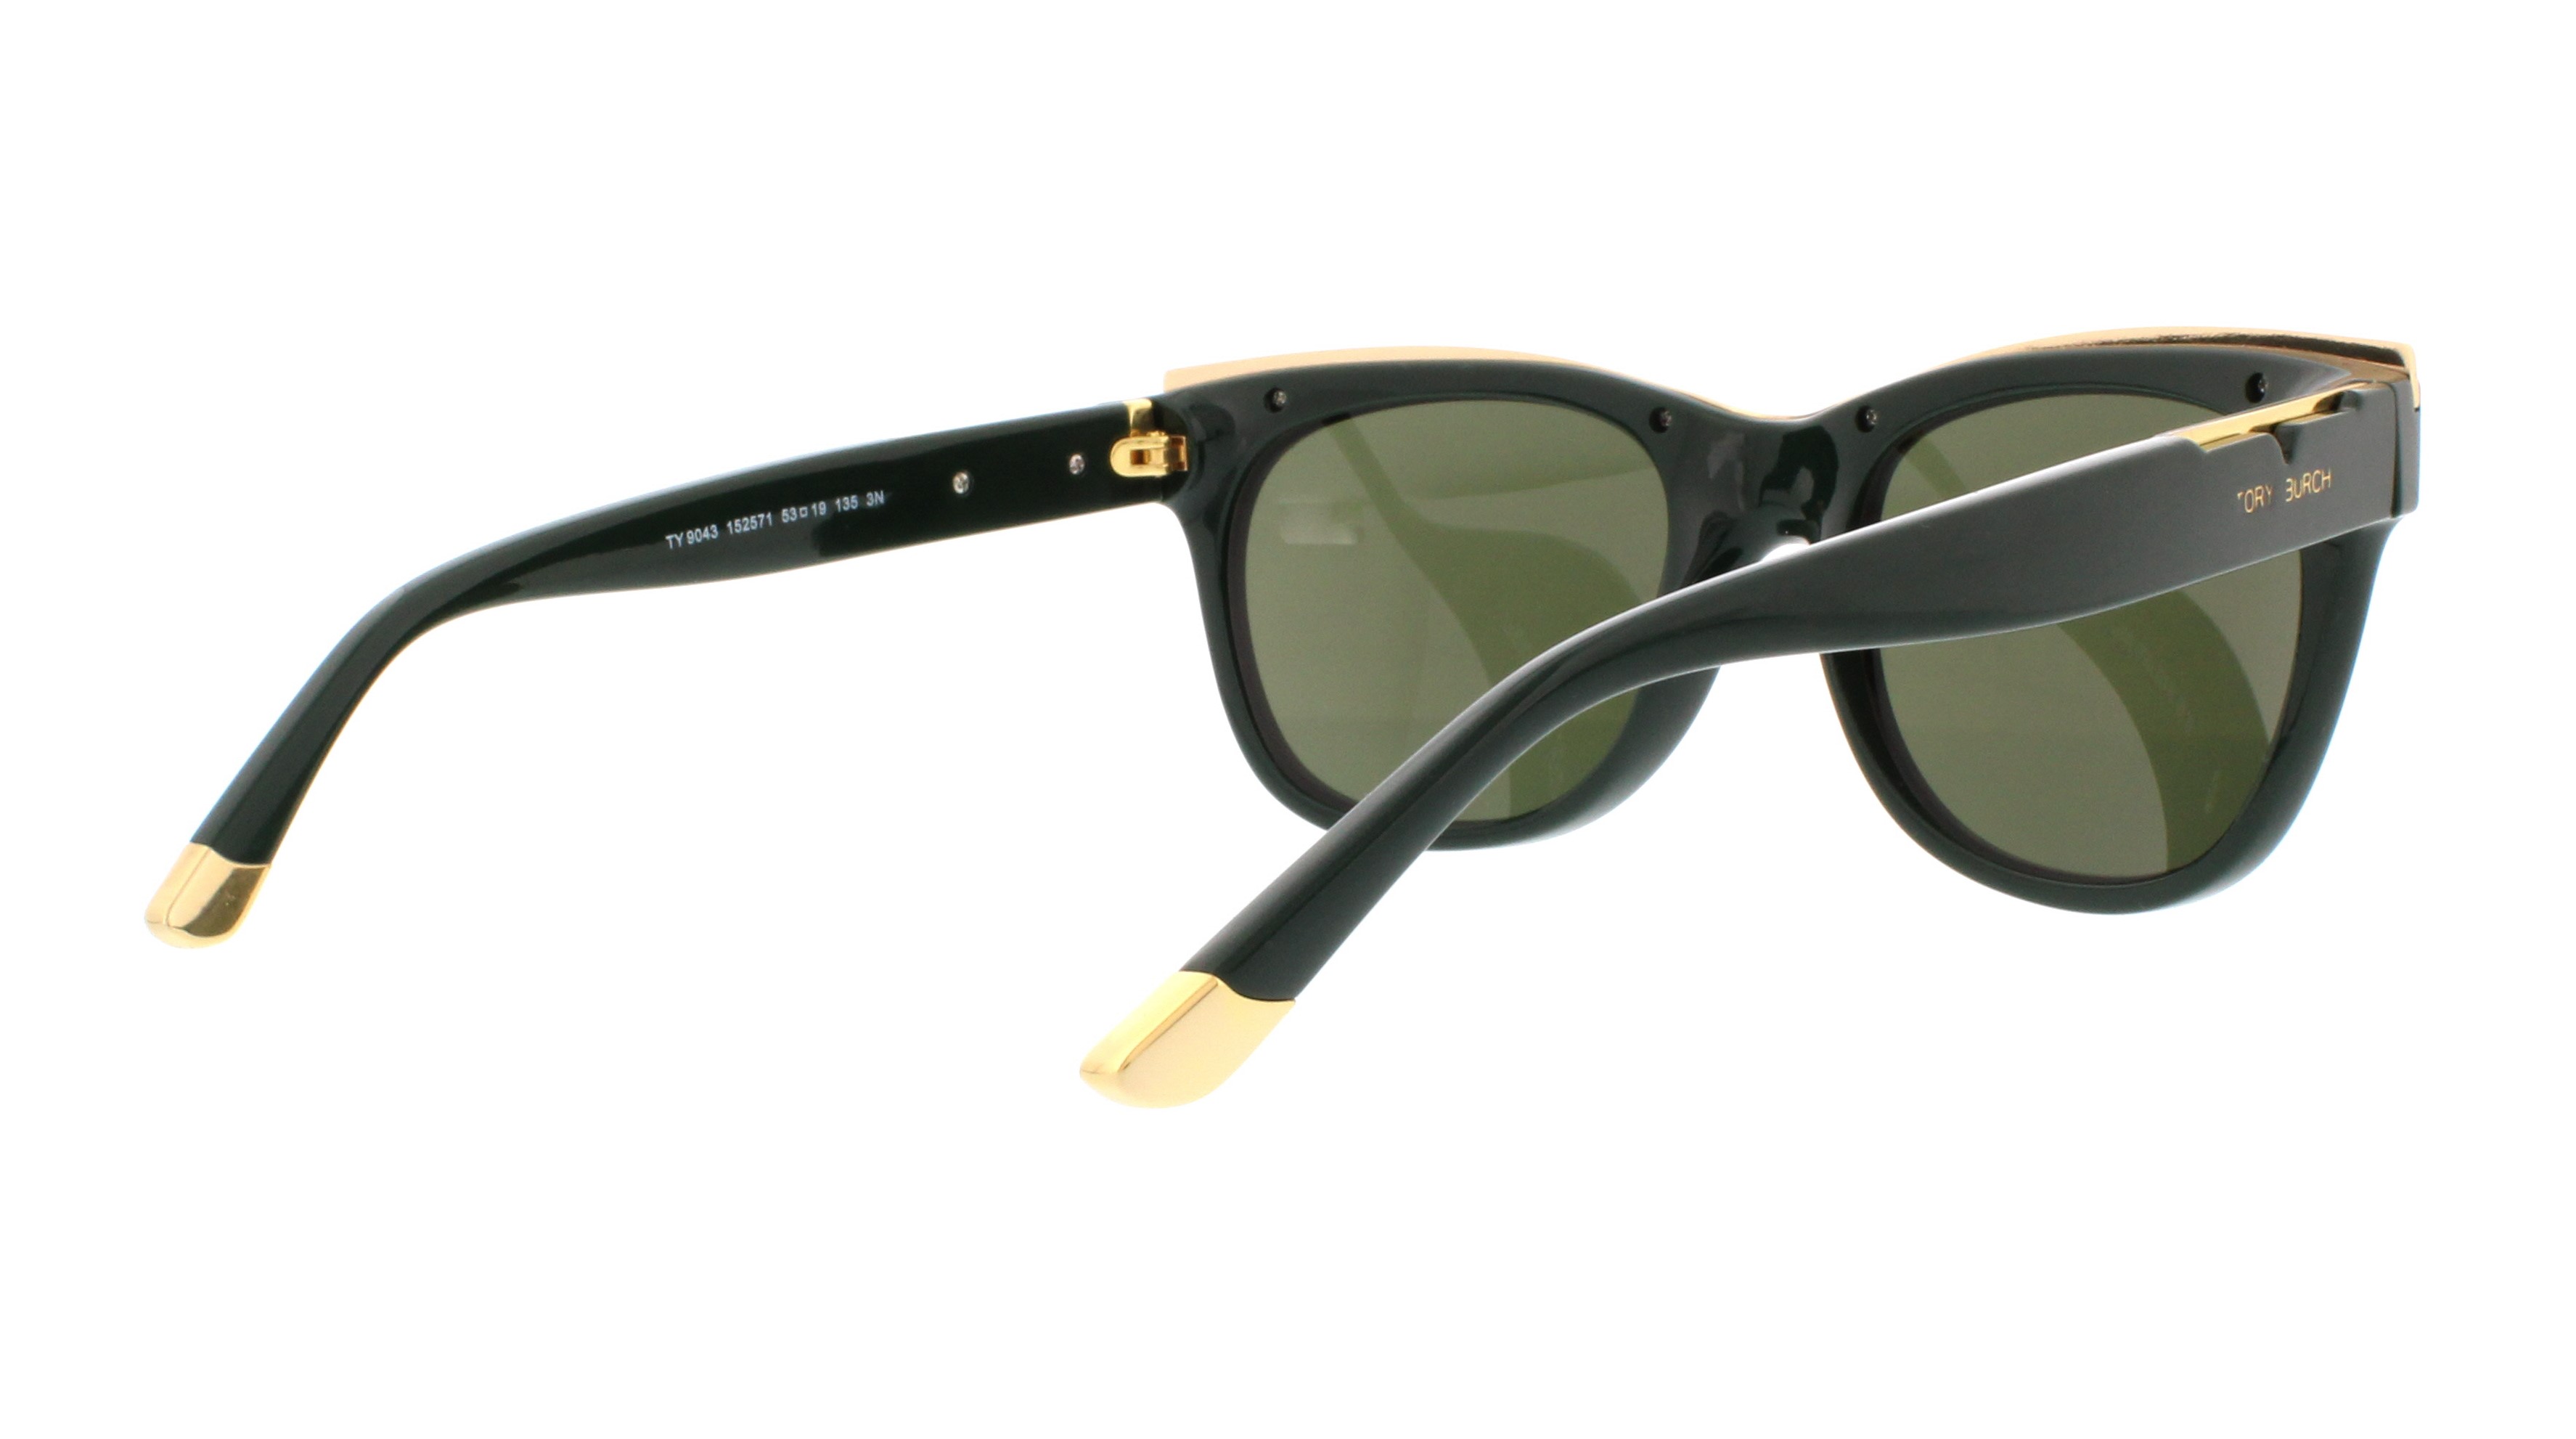 3 Pairs Of Tory Burch Sunglasses That Really Spark Joy - The Mom Edit